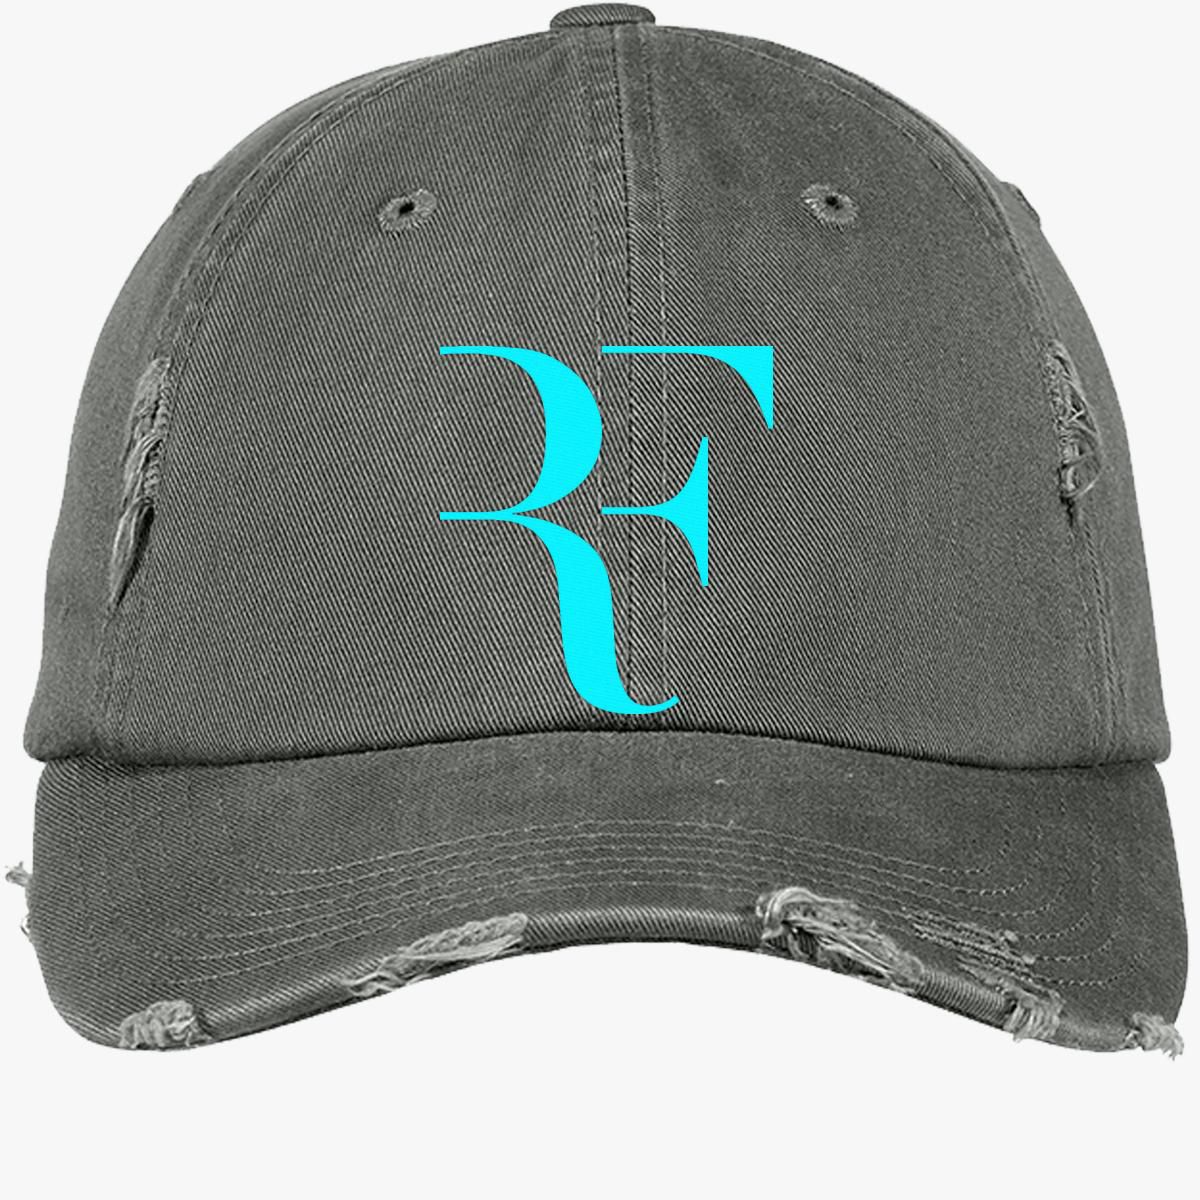 Roger FEDERER Distressed Cotton Twill Cap (Embroidered ...